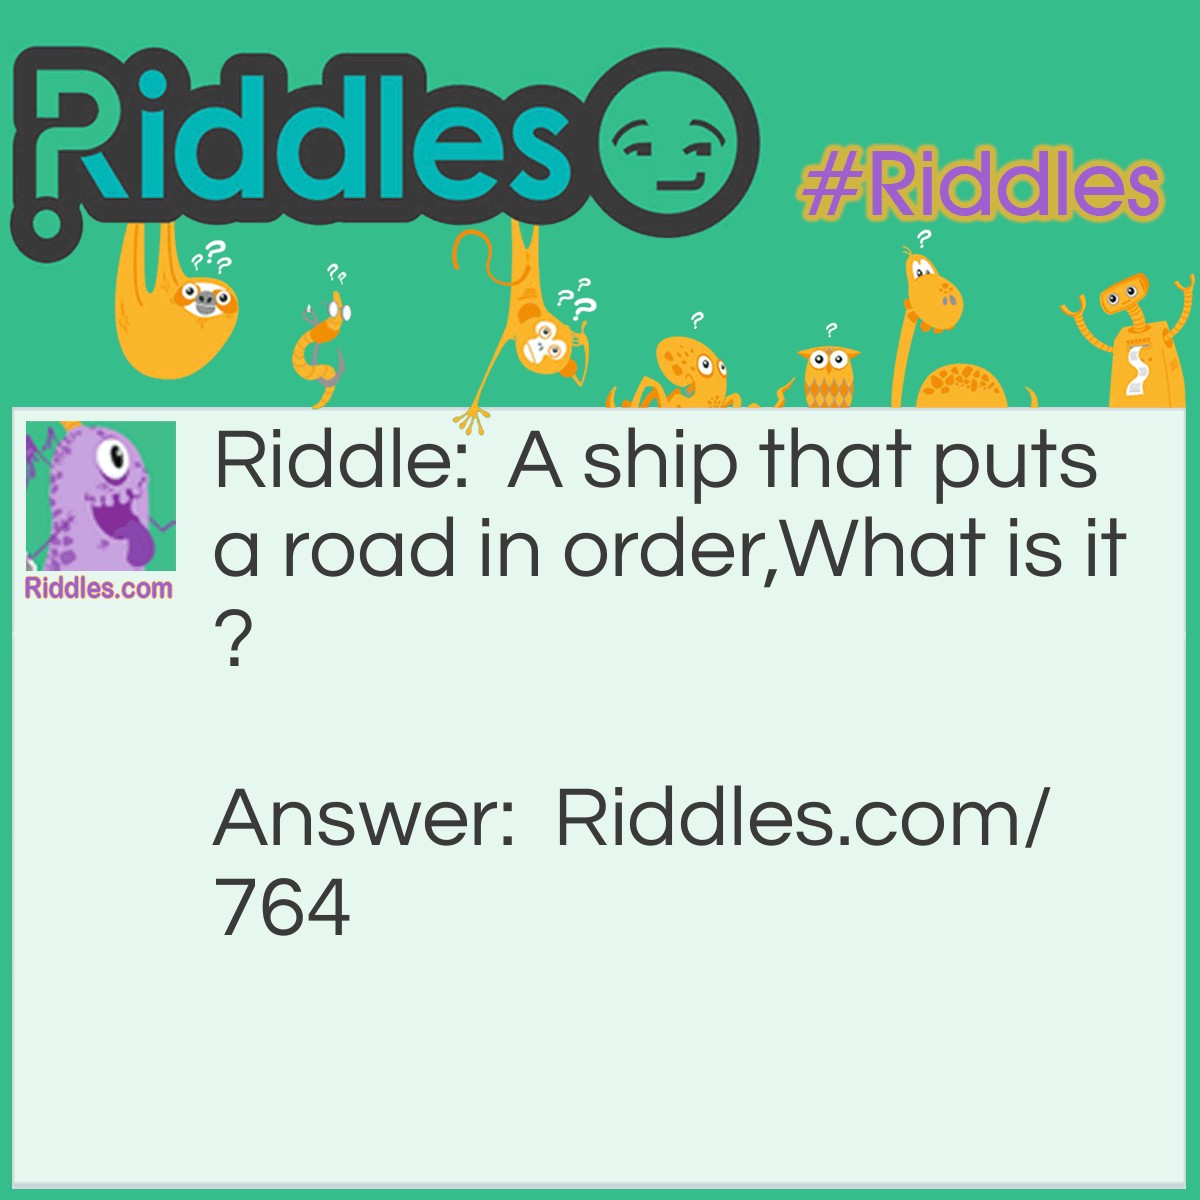 Riddle: A ship that puts a road in order,
What is it? Answer: A smoothing iron.